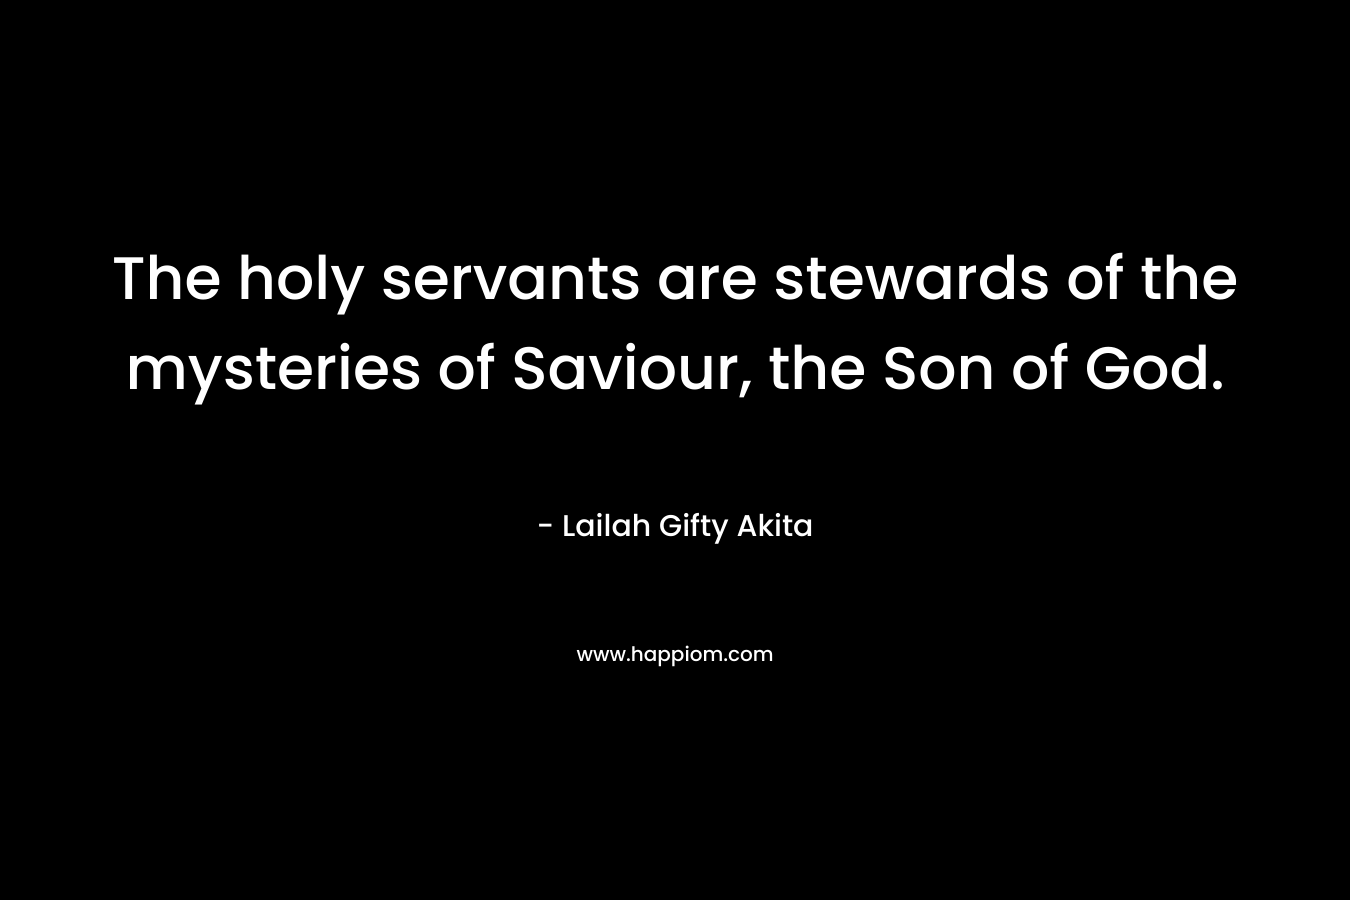 The holy servants are stewards of the mysteries of Saviour, the Son of God. – Lailah Gifty Akita